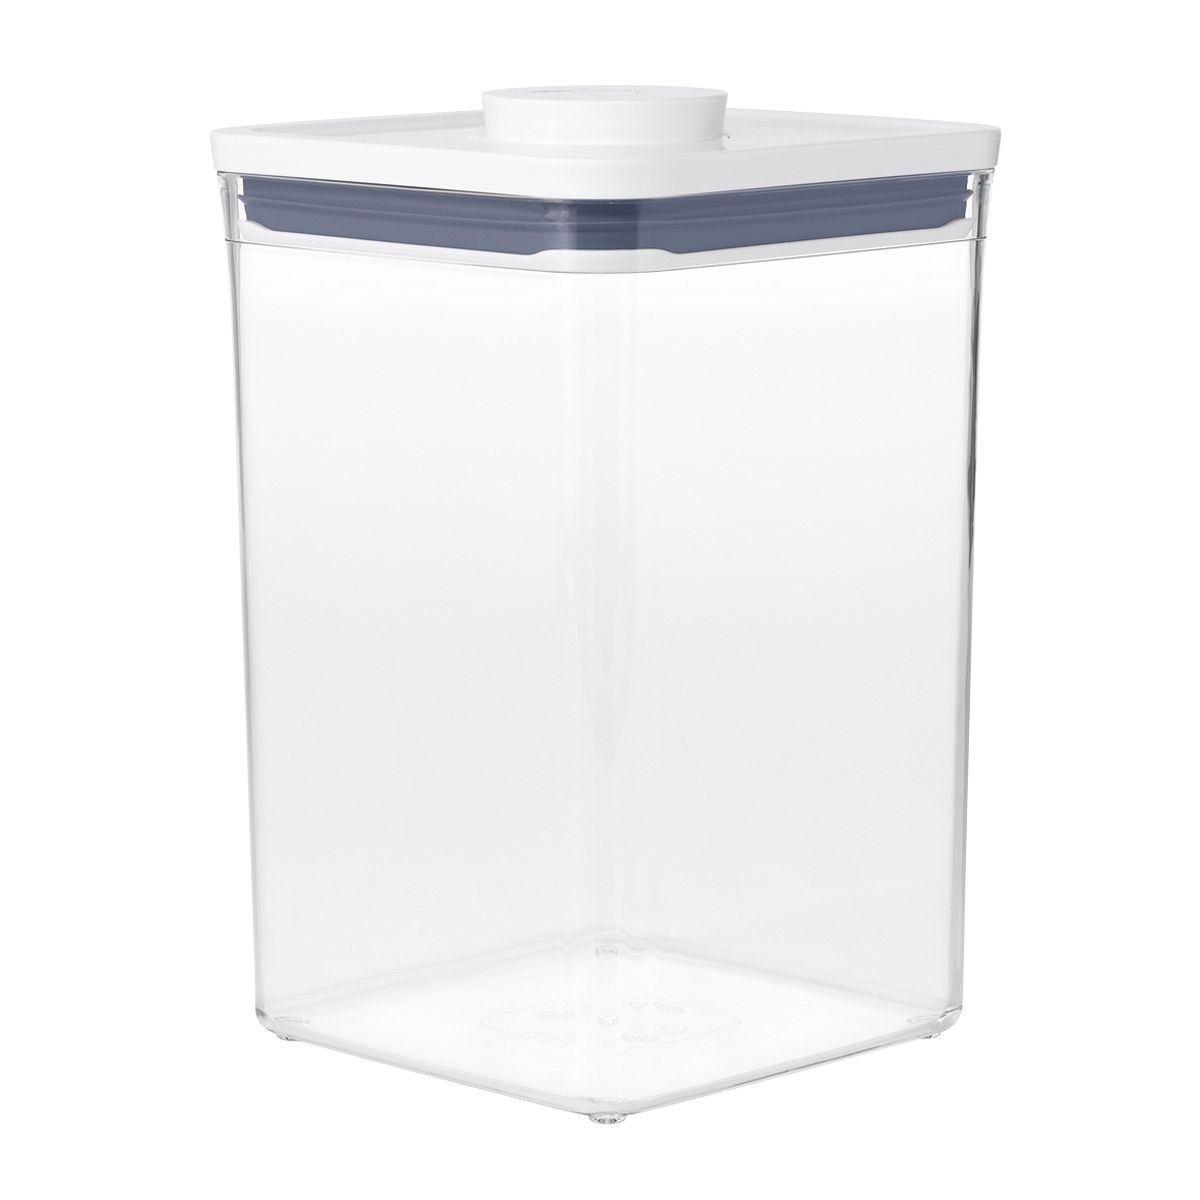 Big Square POP Container | The Container Store